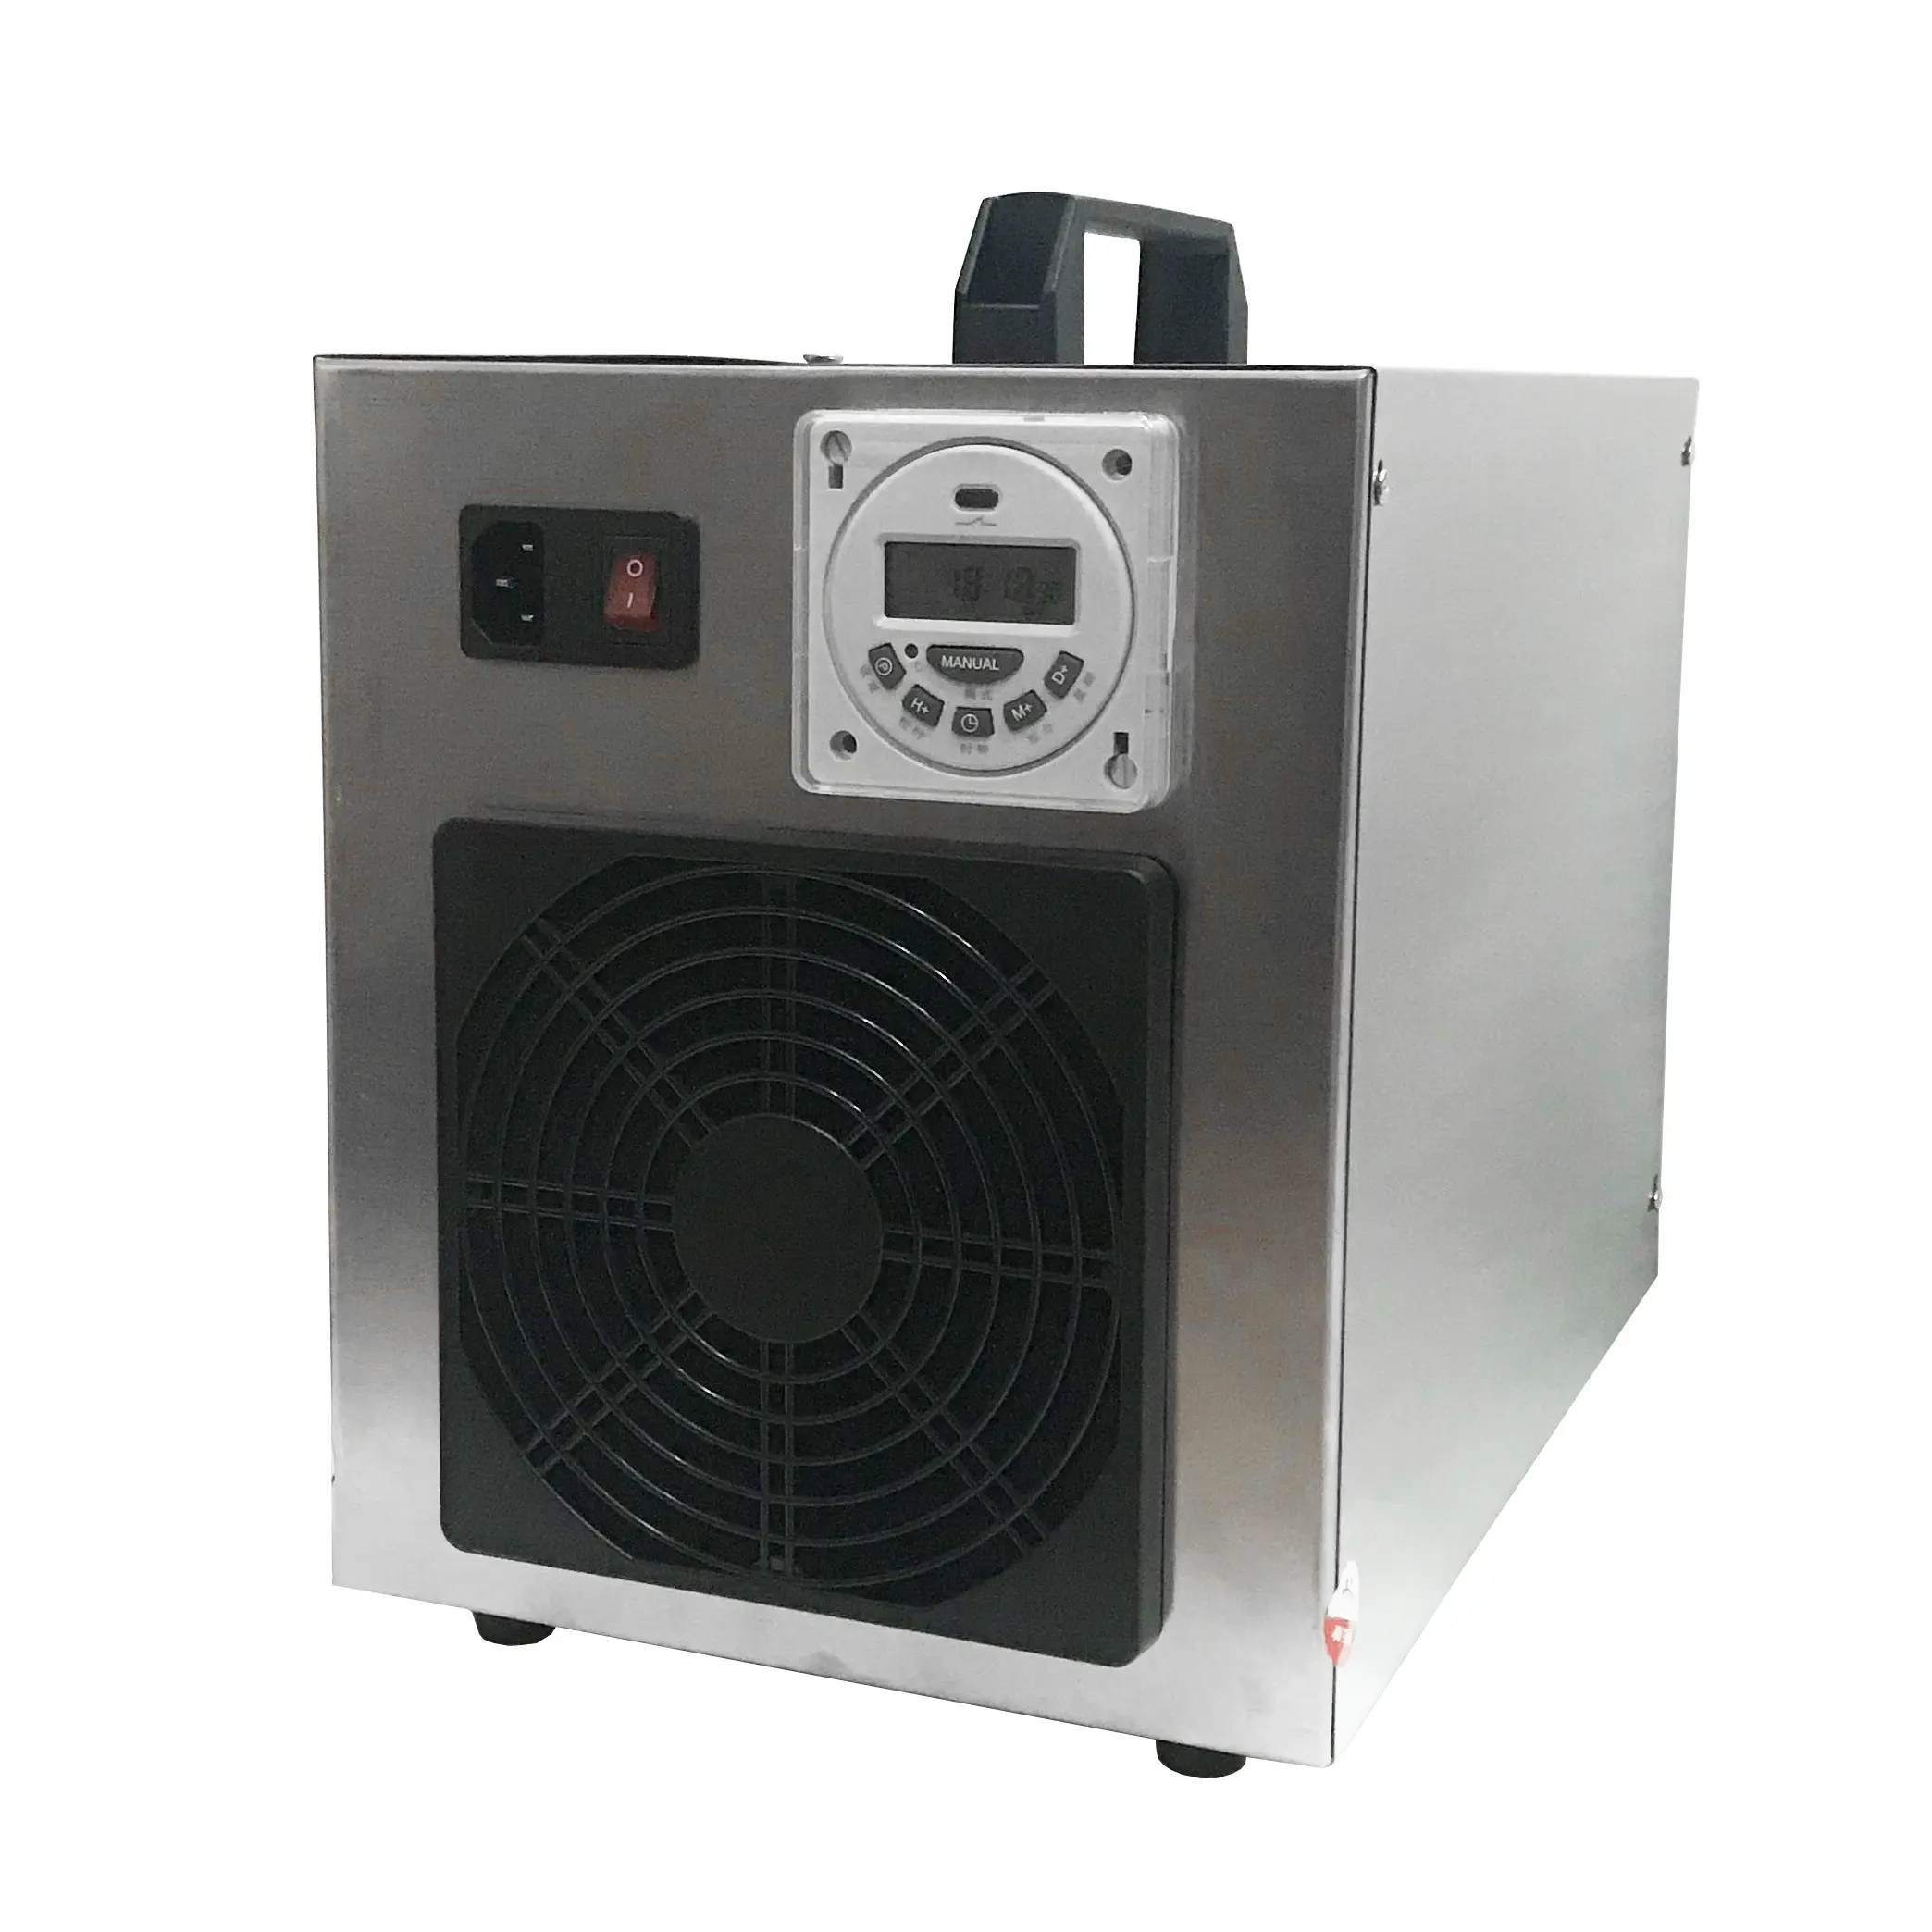 20g, 30g, 40g, 50g/h ozone generator air purifier portable air cooling medical ozone disinfection machine